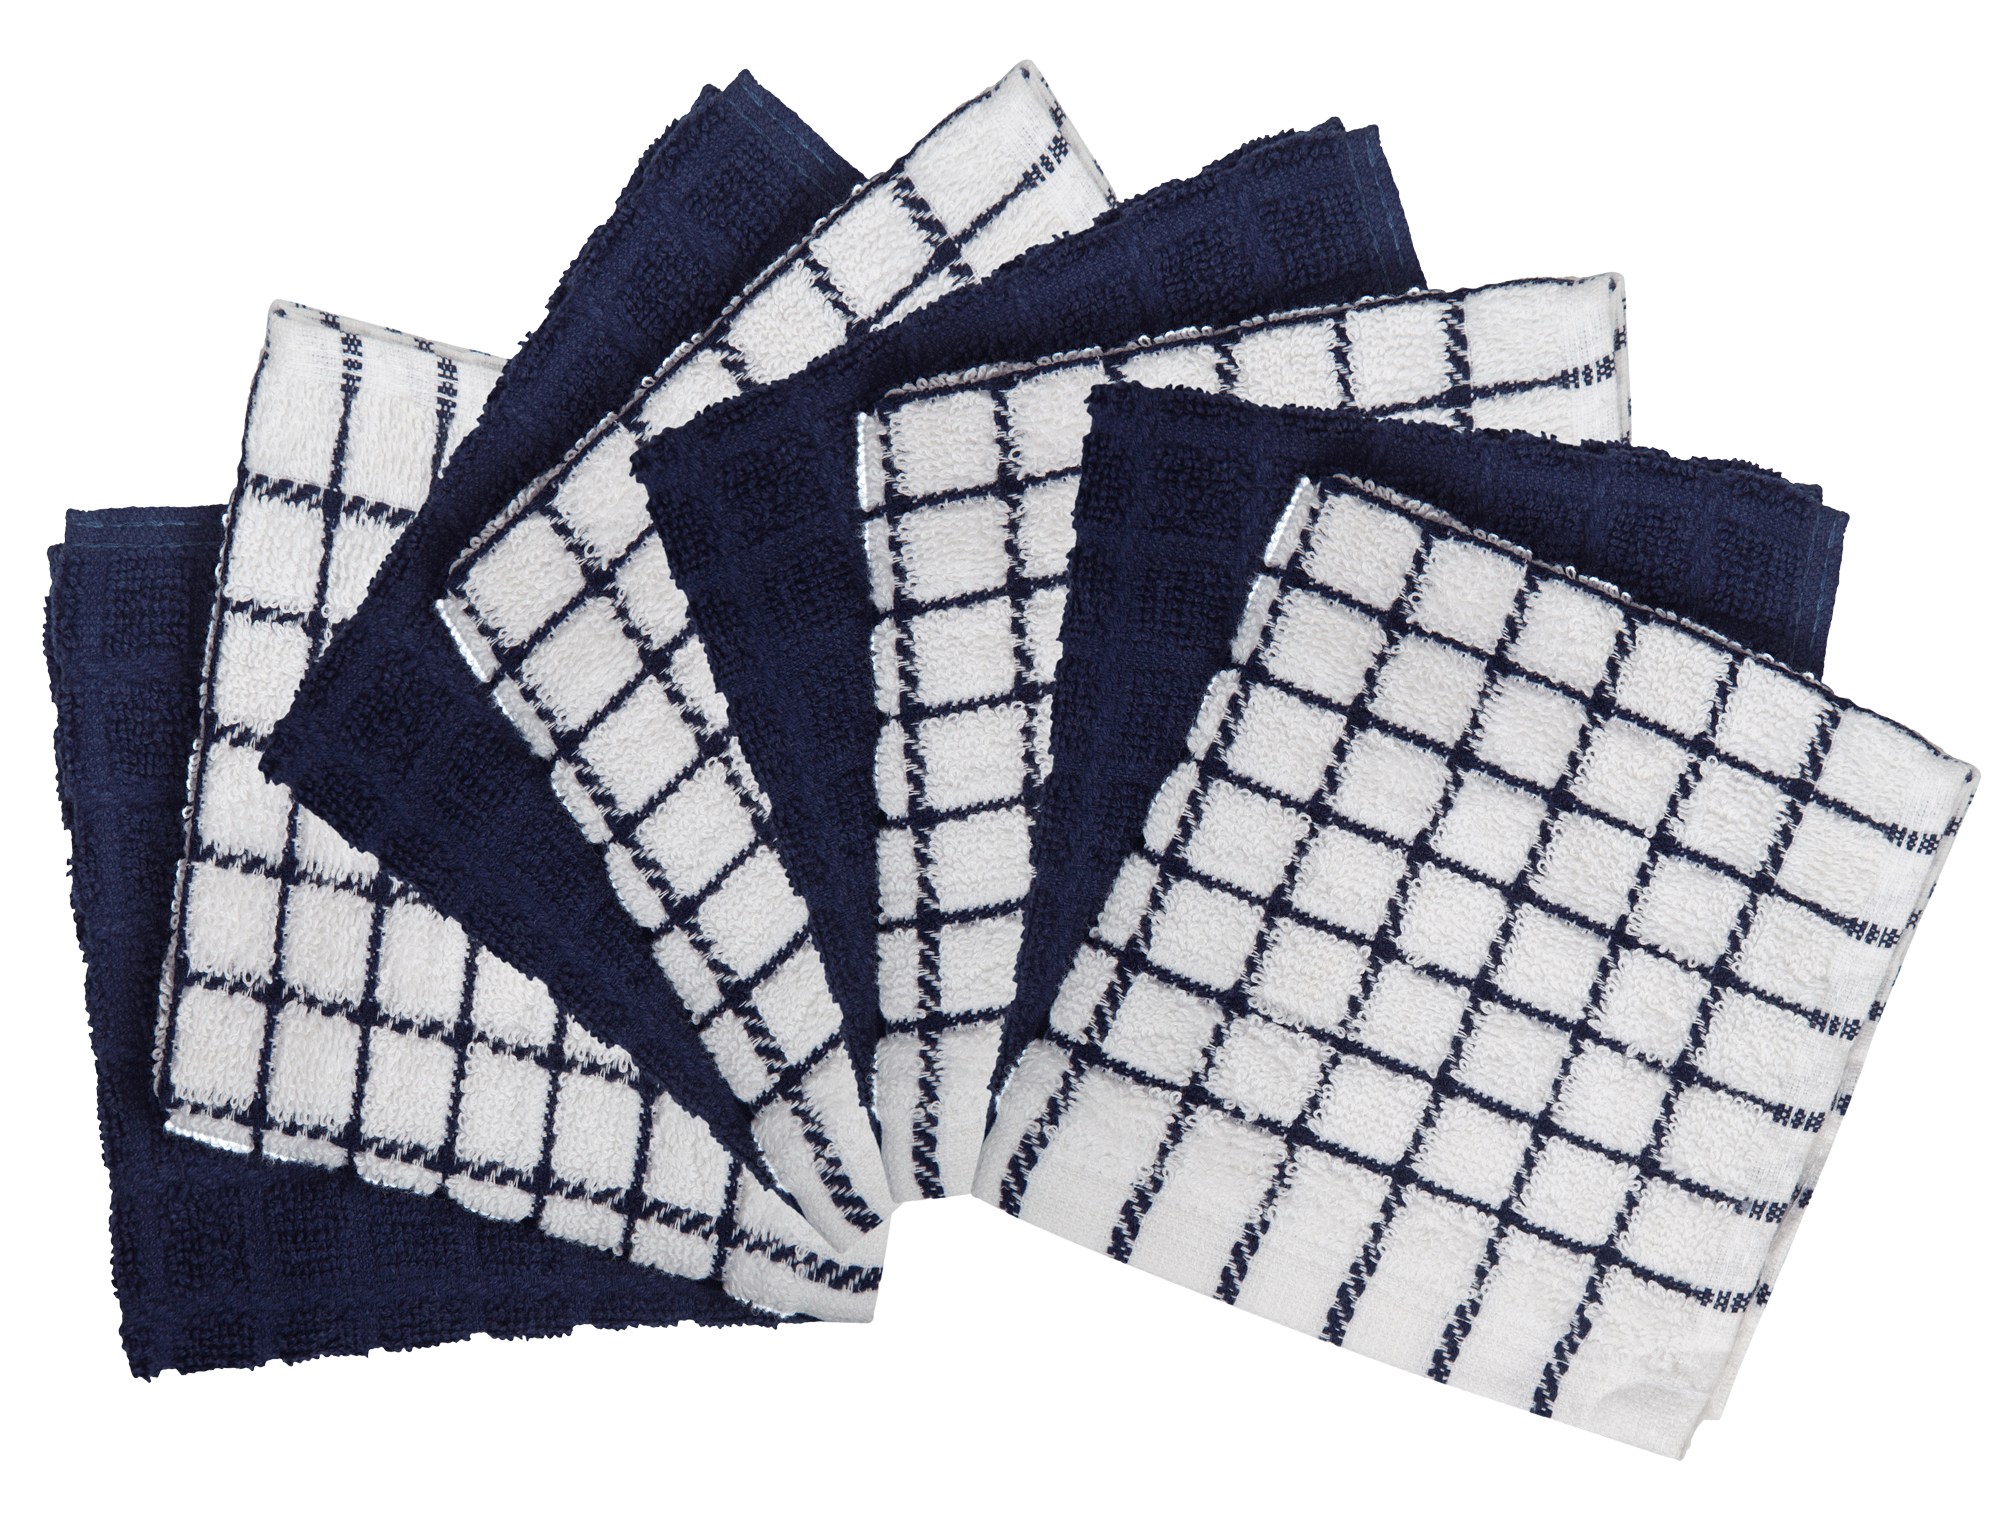 The Big One® Yarn-Dyed Kitchen Towel 5-pk.